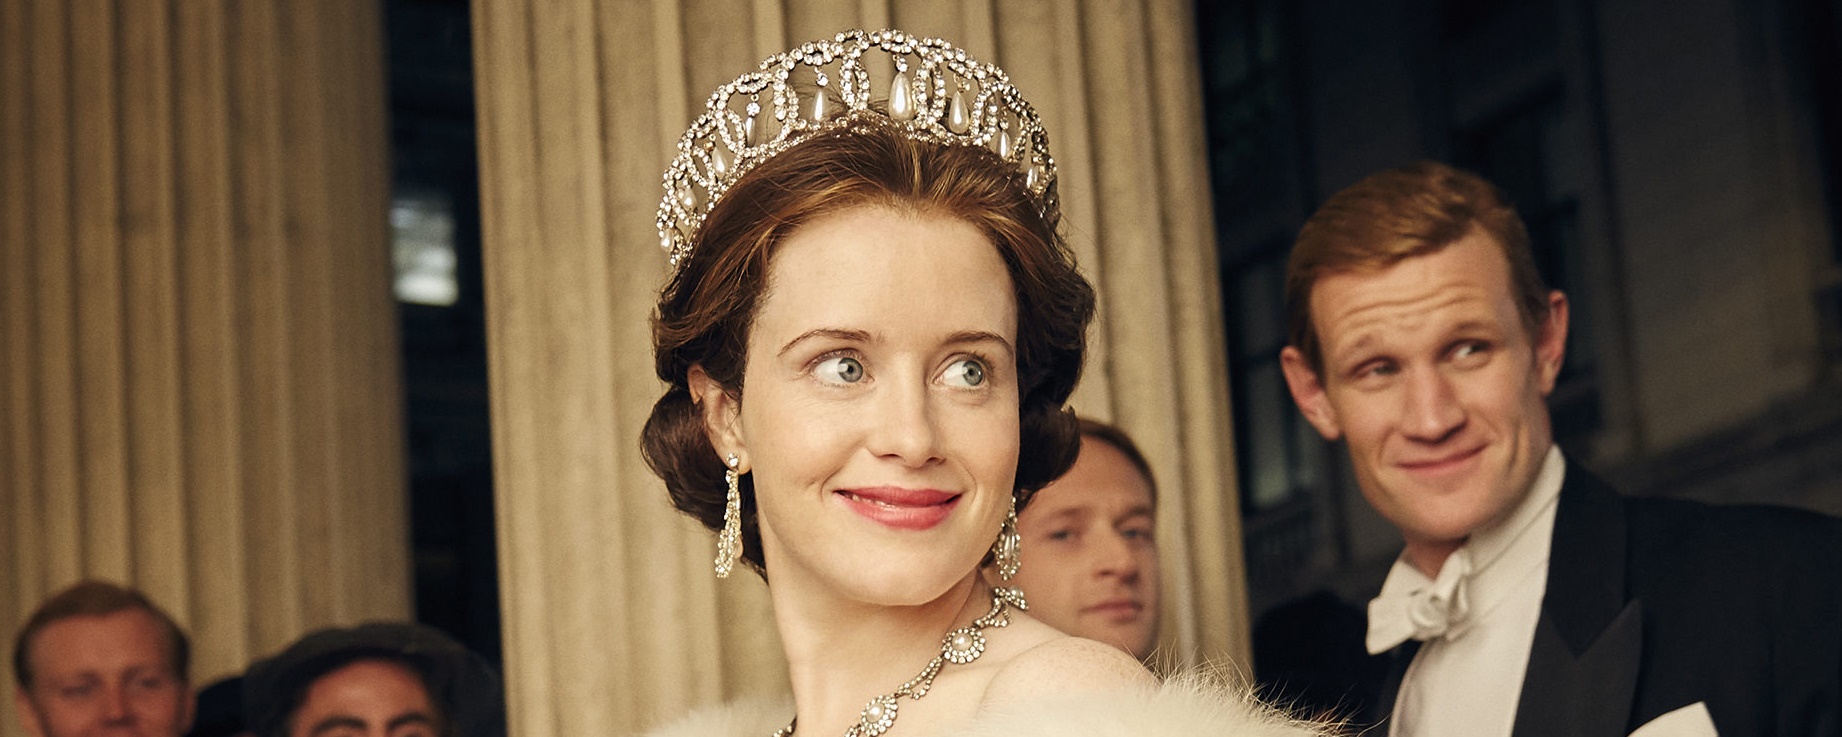 Image by: Golden Globe 2021: The Crown is highlighted with six nominations; see list!